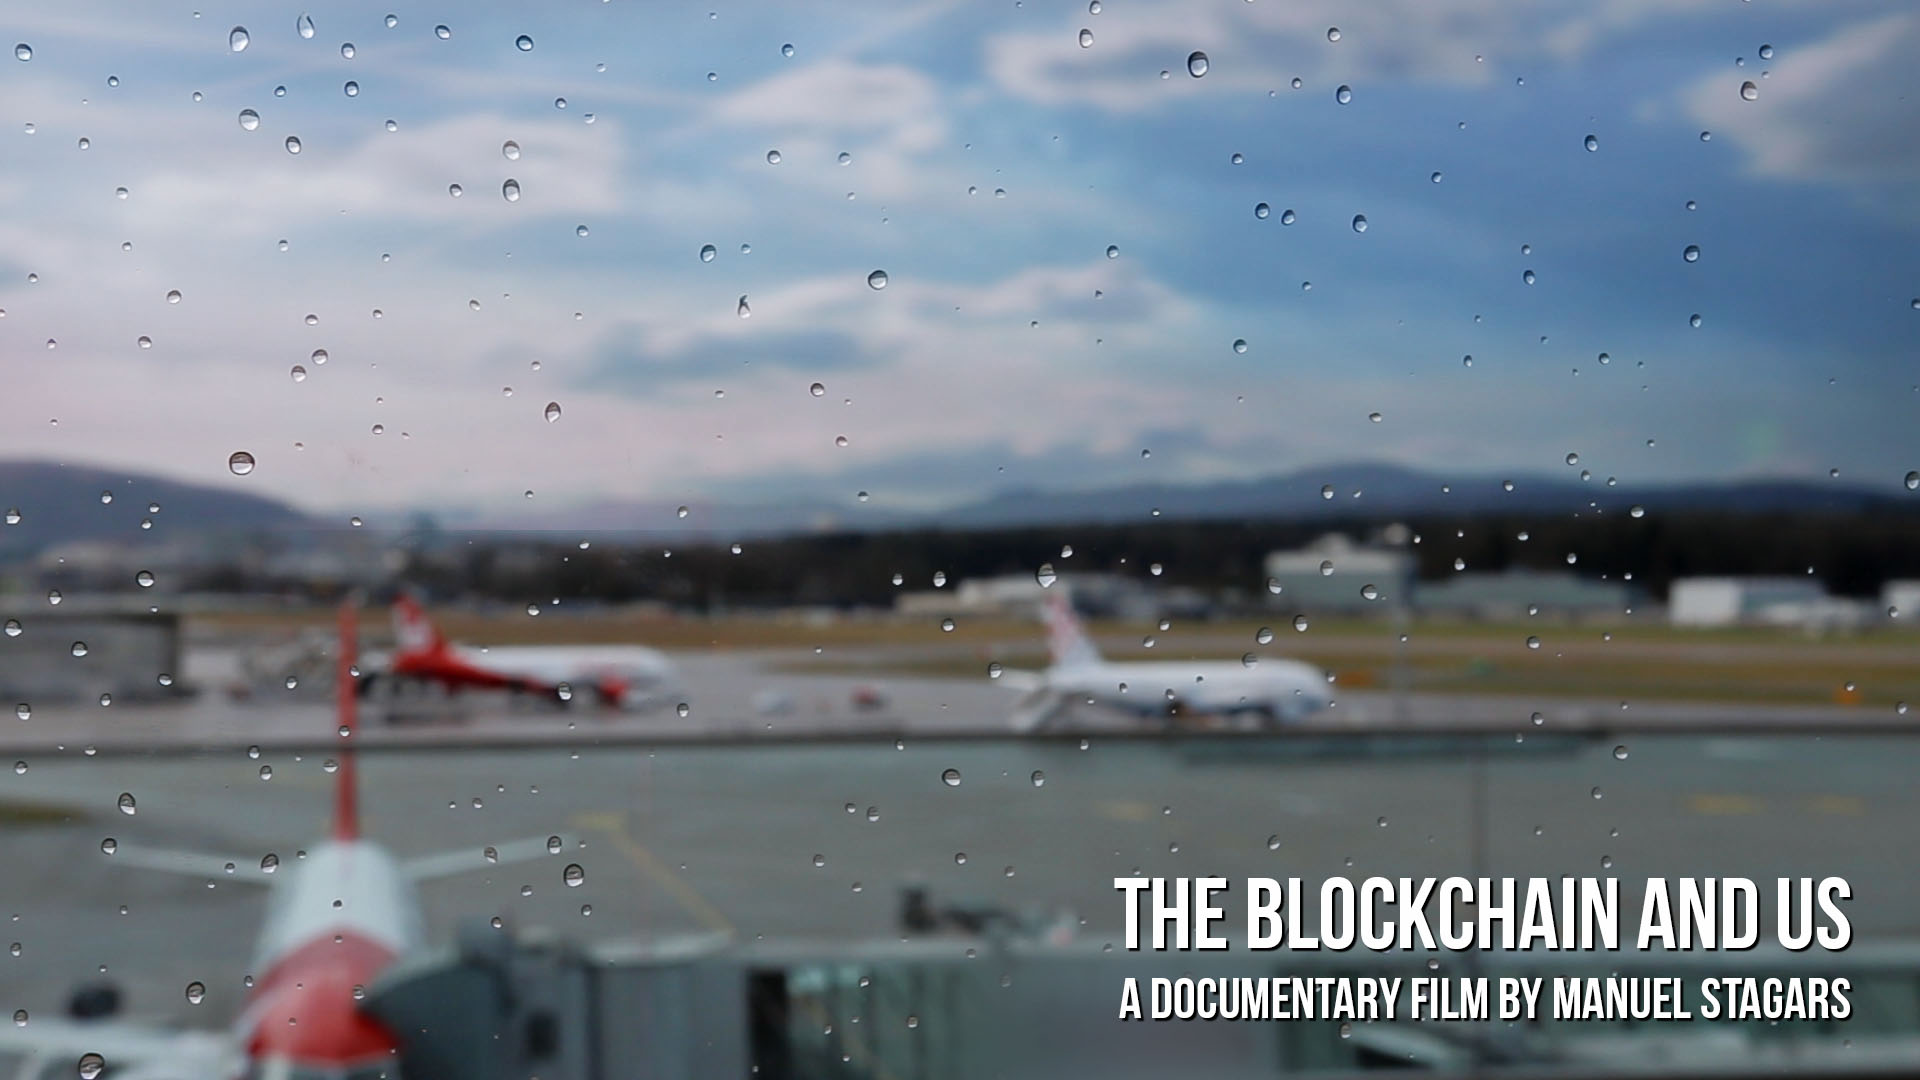 the-blockchain-and-us_still-airport-after-rain